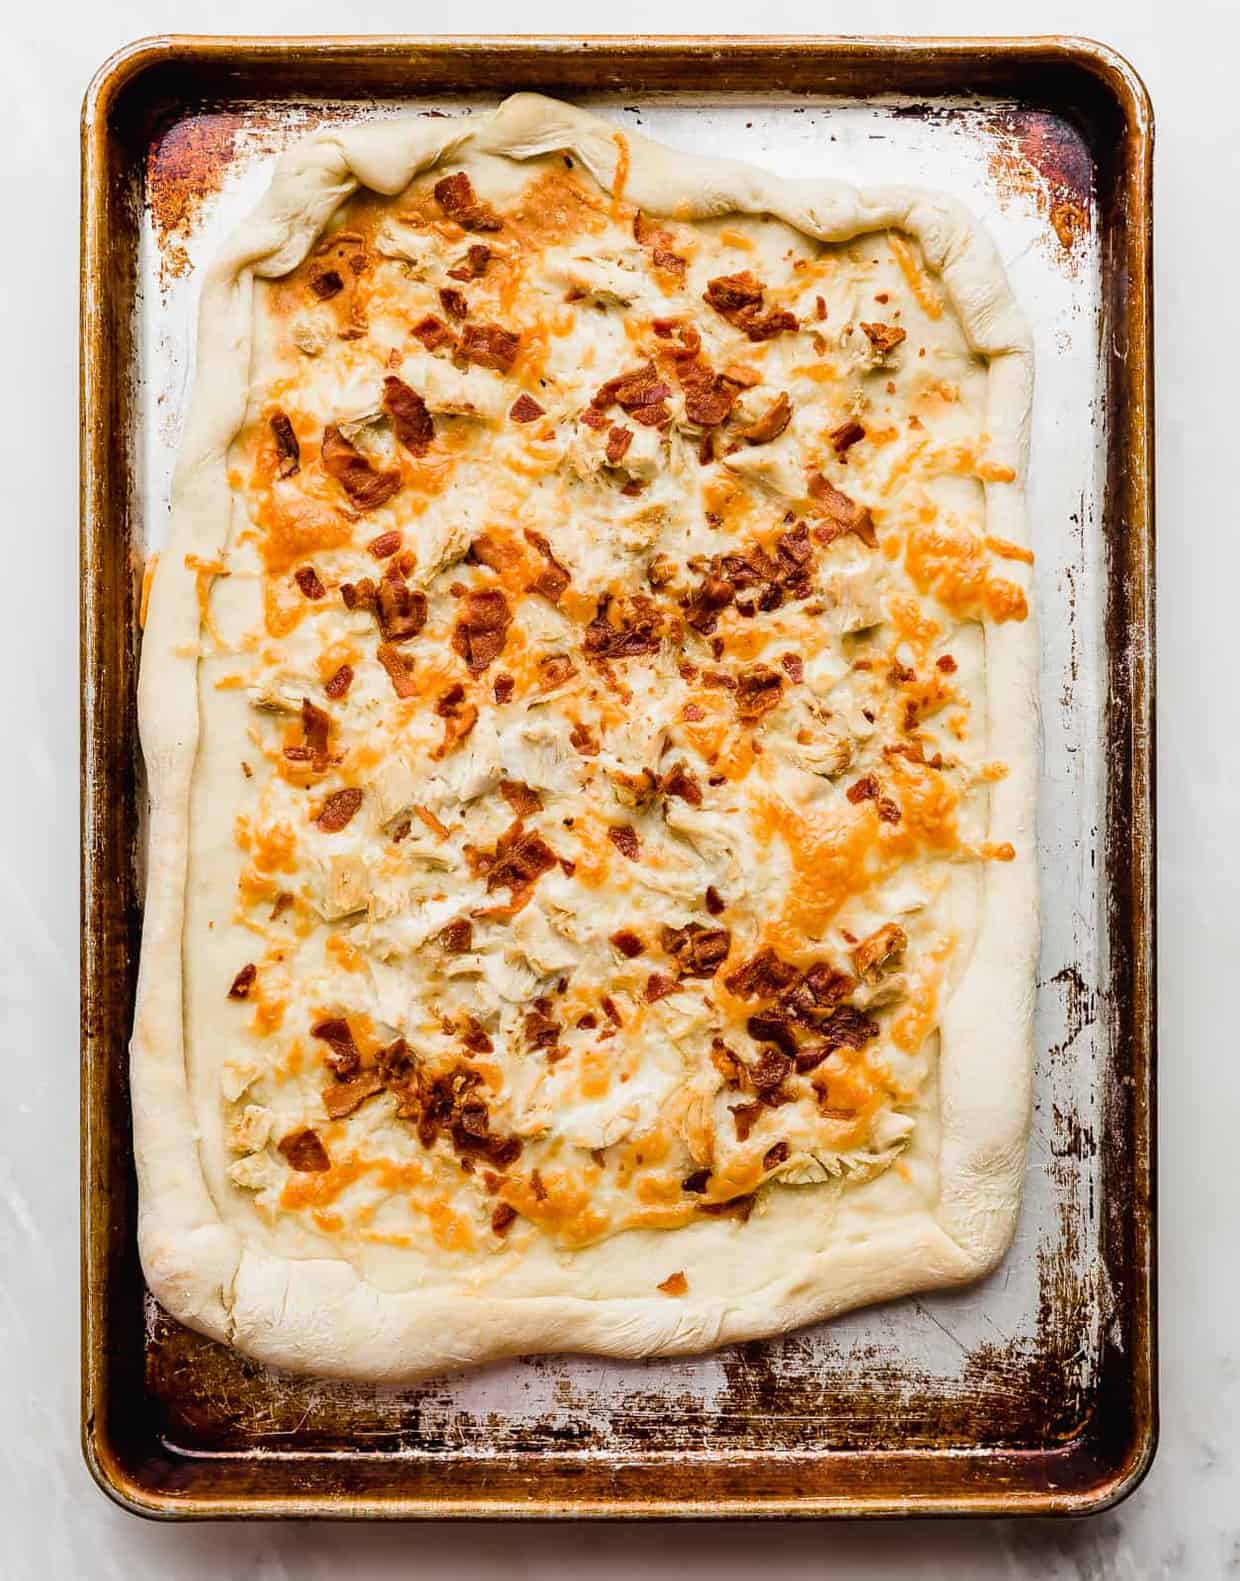 Baked pizza dough topped with cheese, bacon, and chicken.